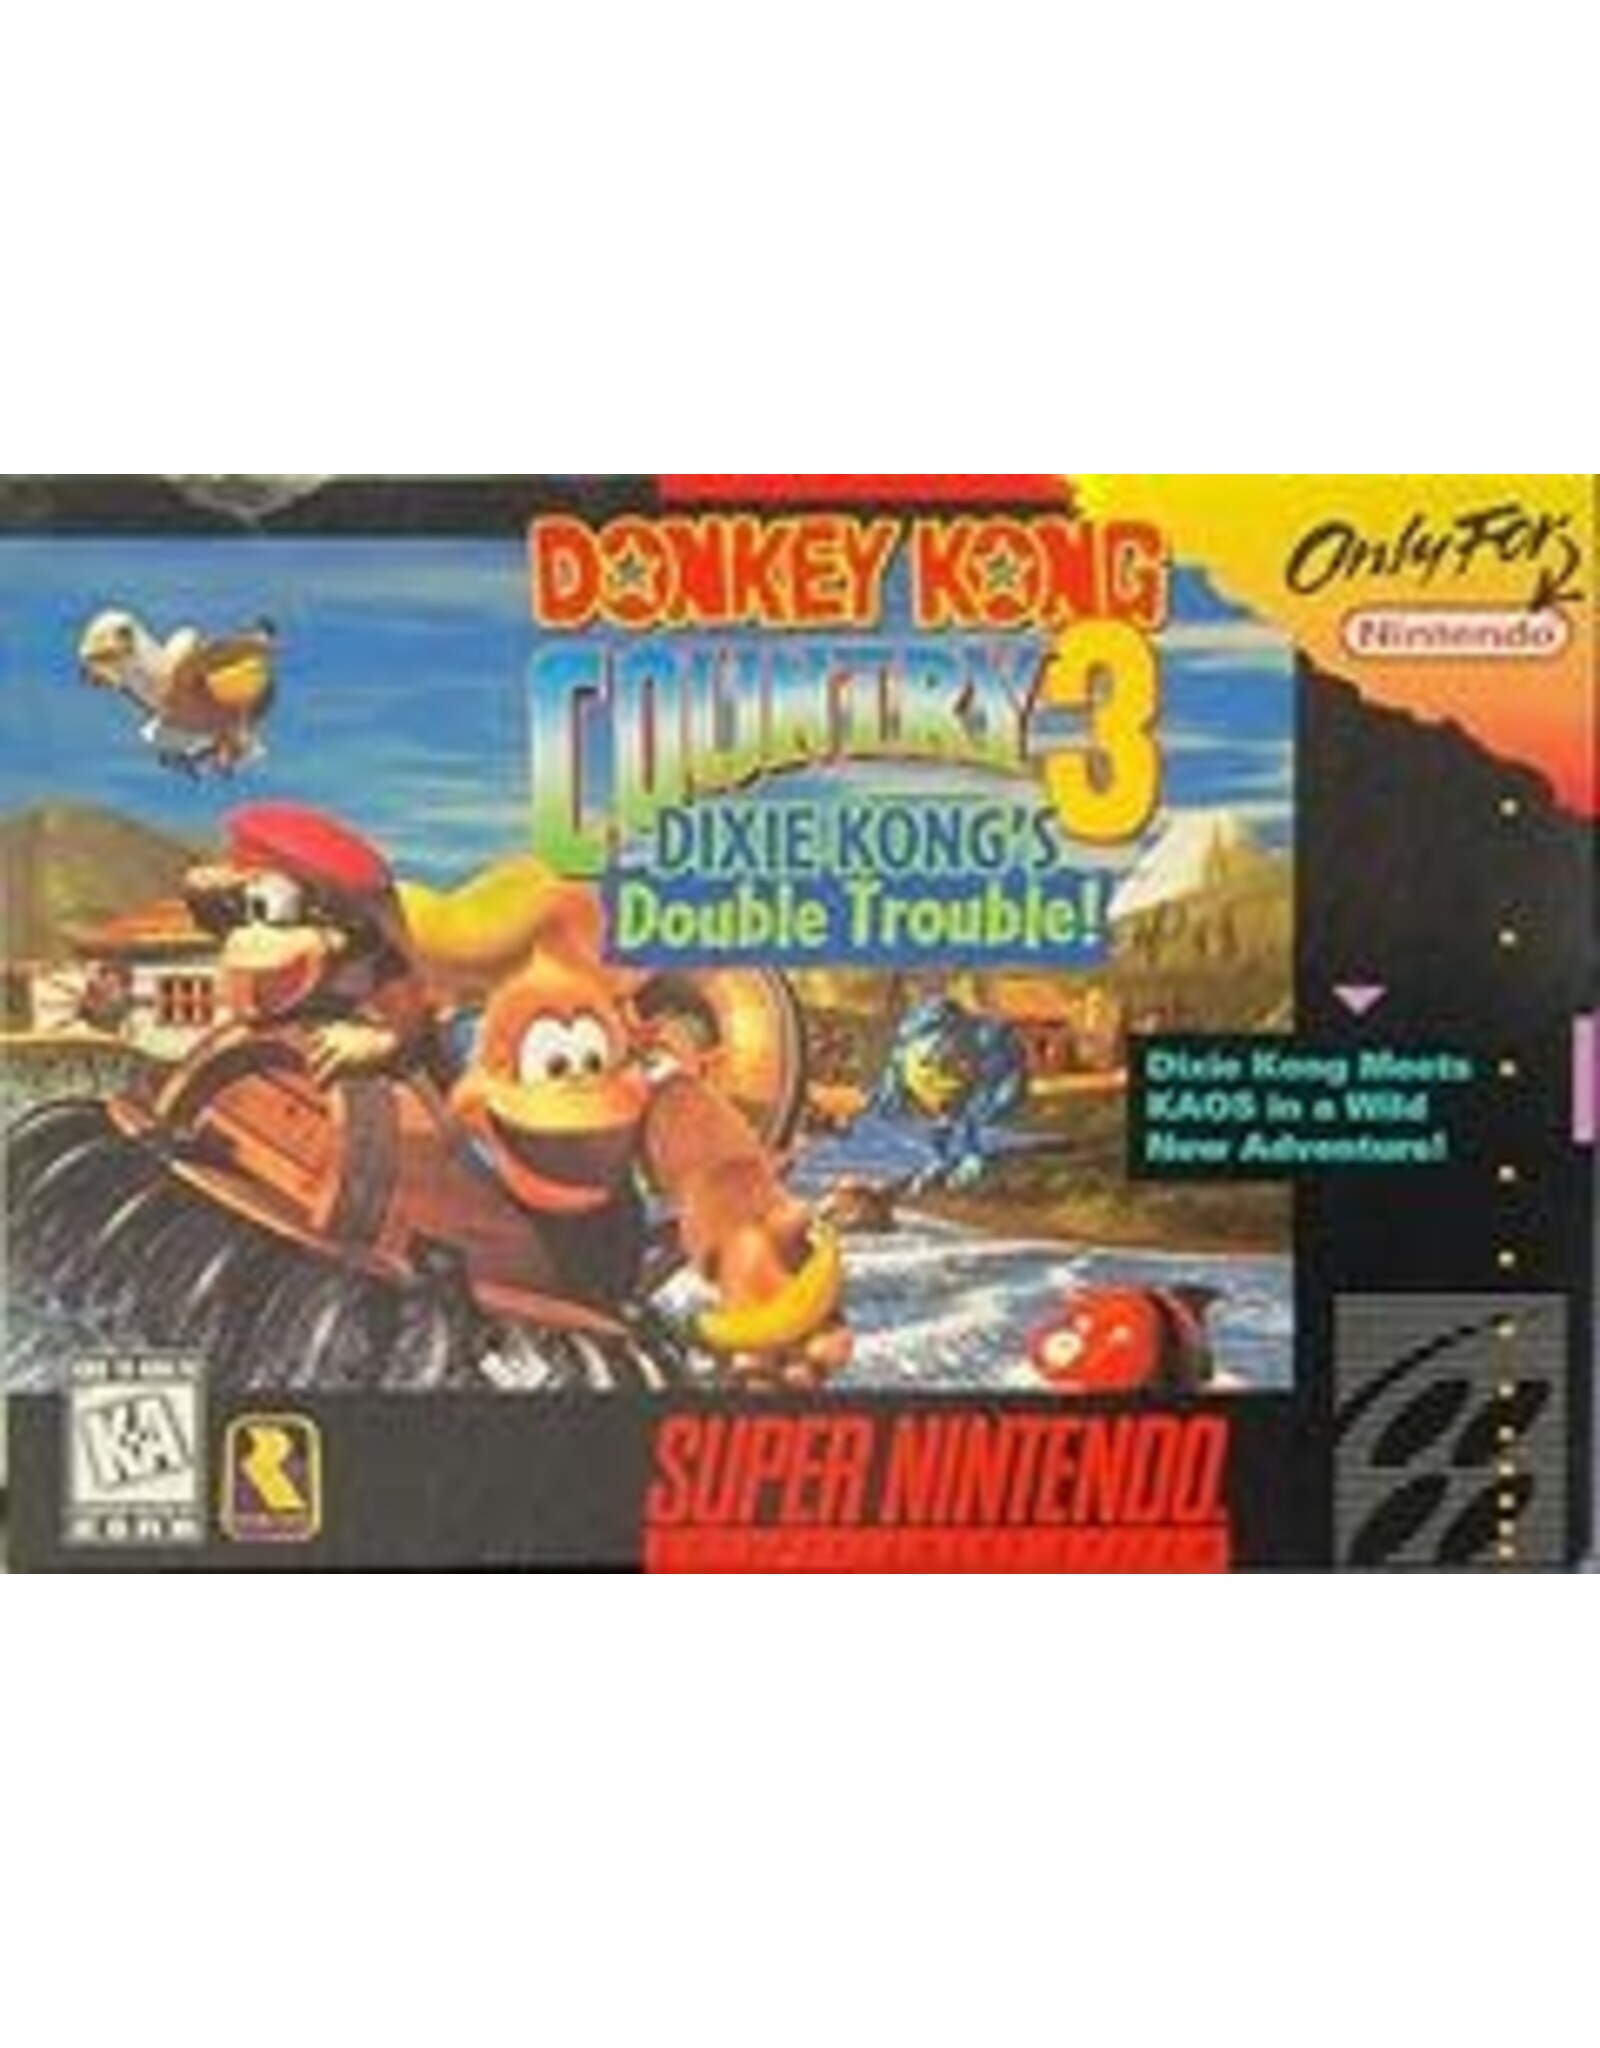 Nintendo Used Game - SNES - Donkey Kong Country 3: Dixie Kong's Double Trouble [Cart Only]